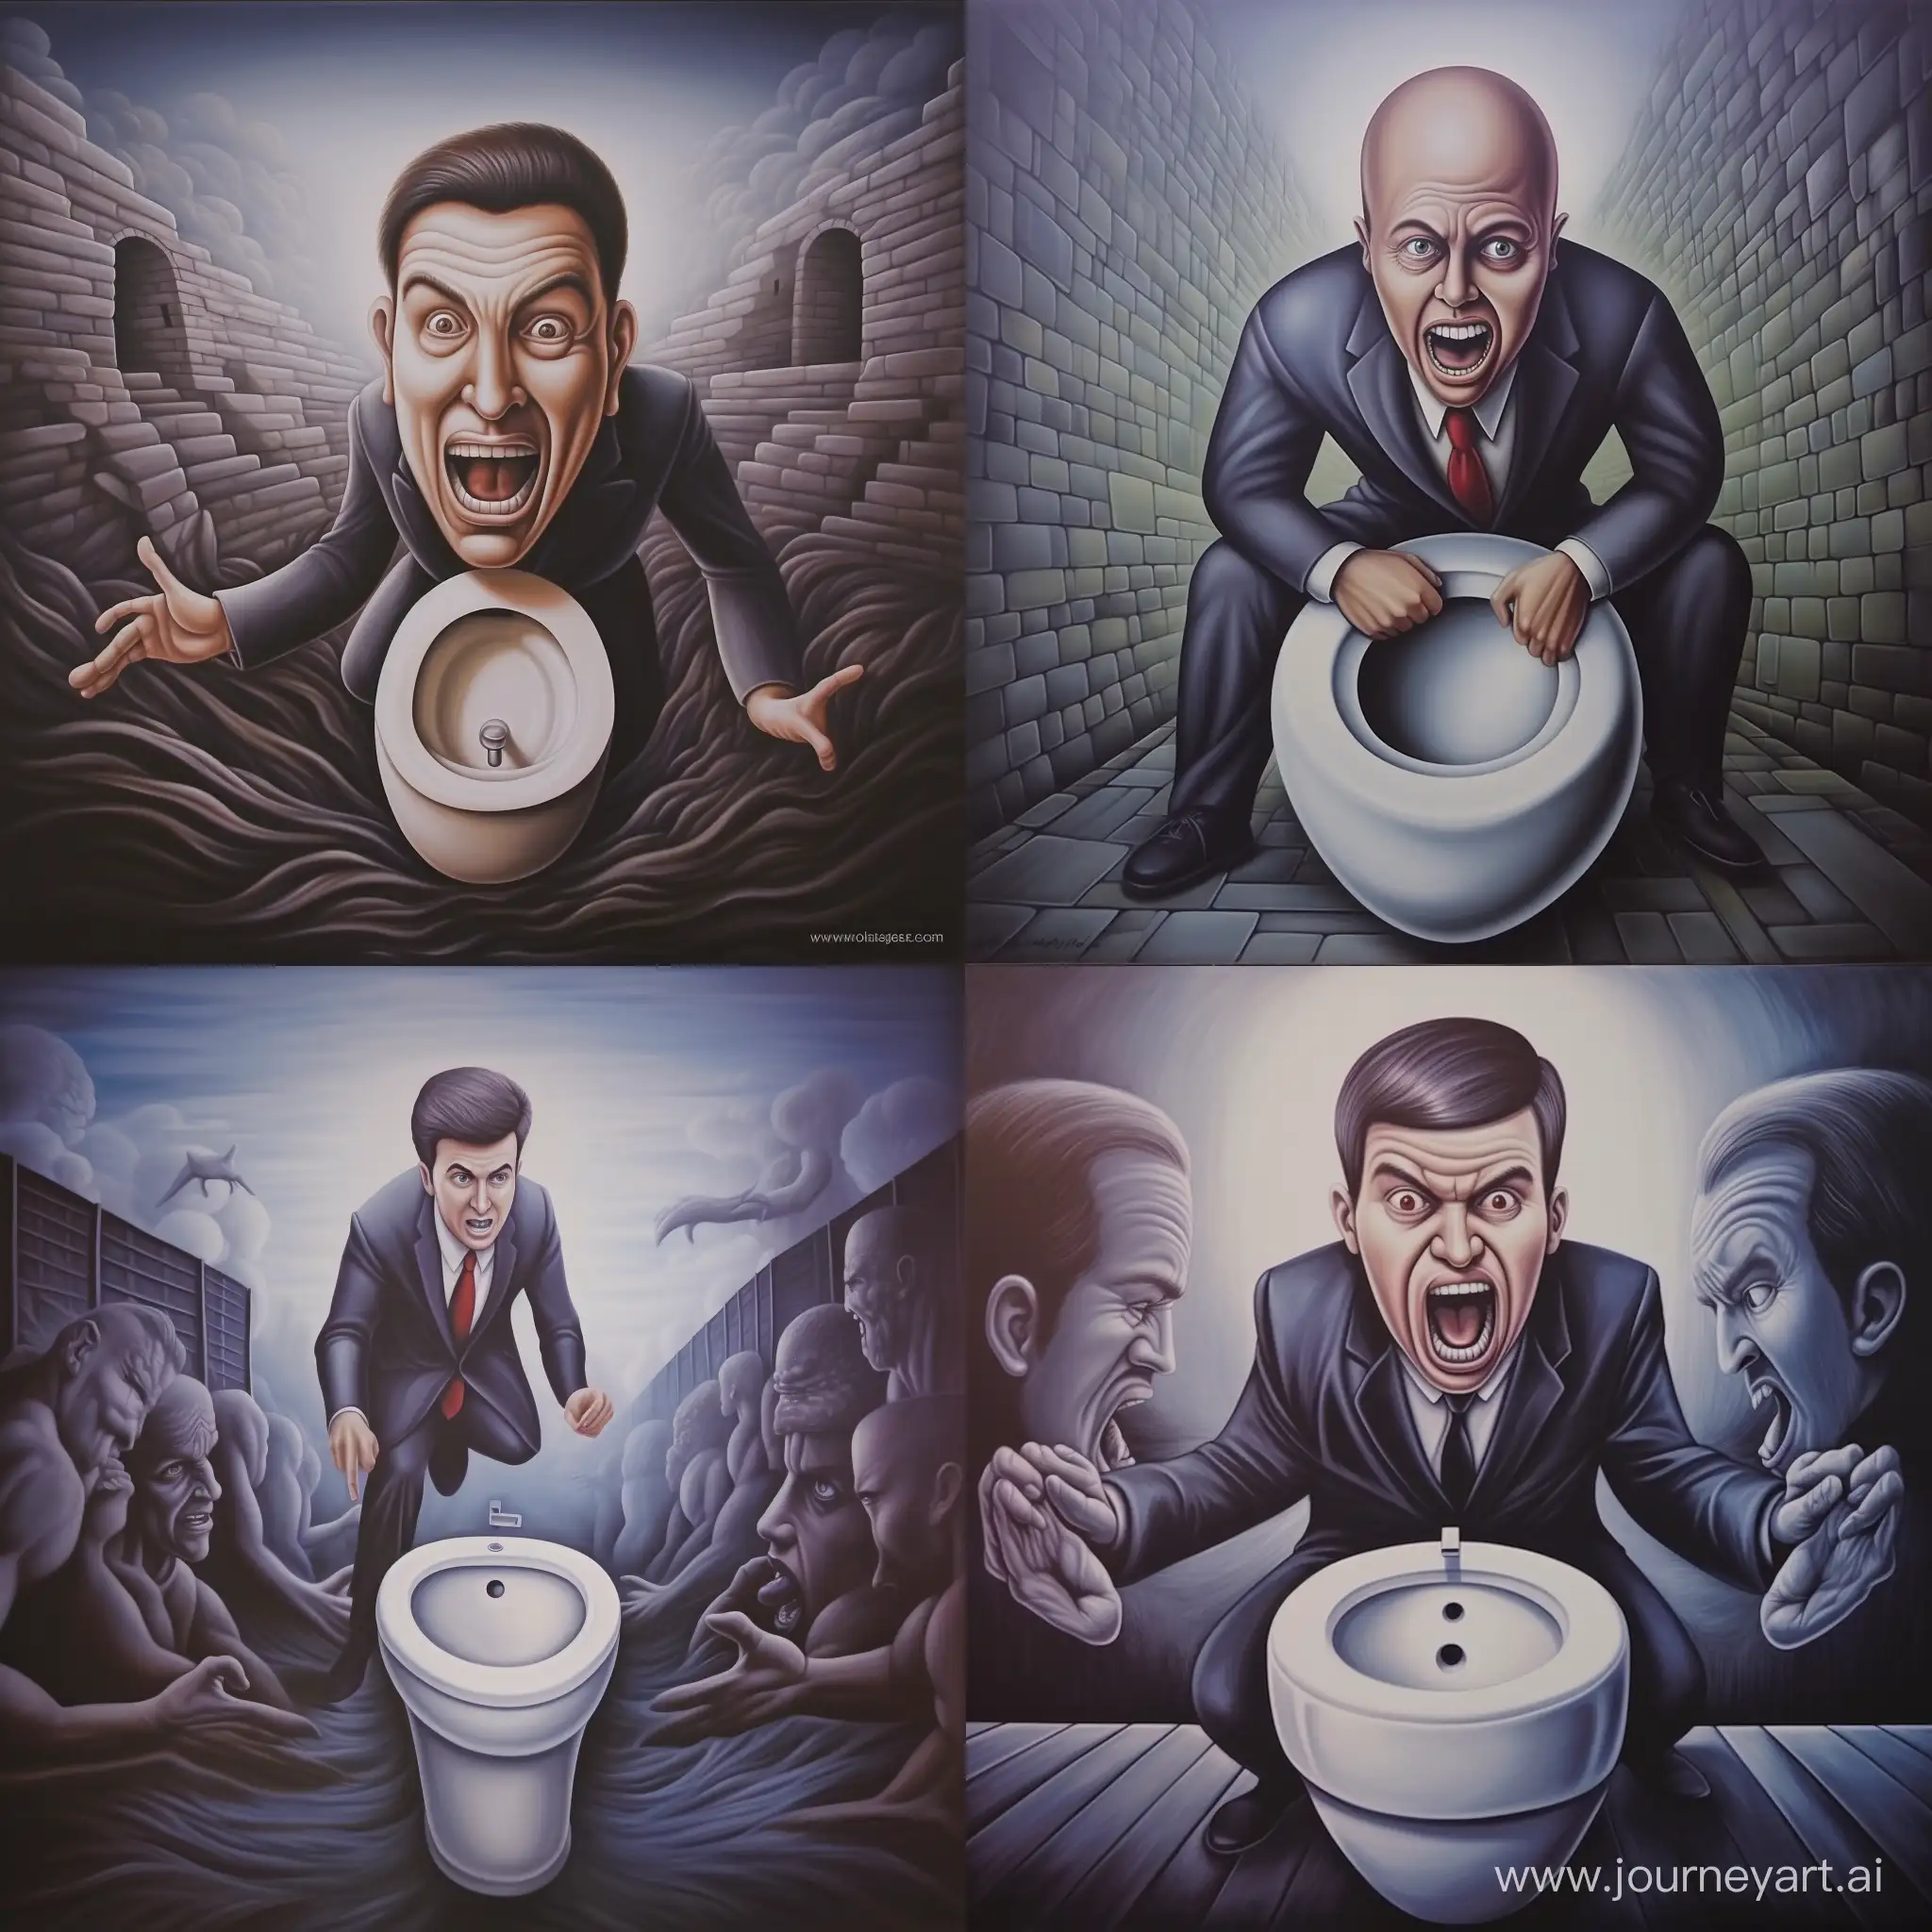 a man being chased by an entity without a body, with a man's head in a toilet bowl